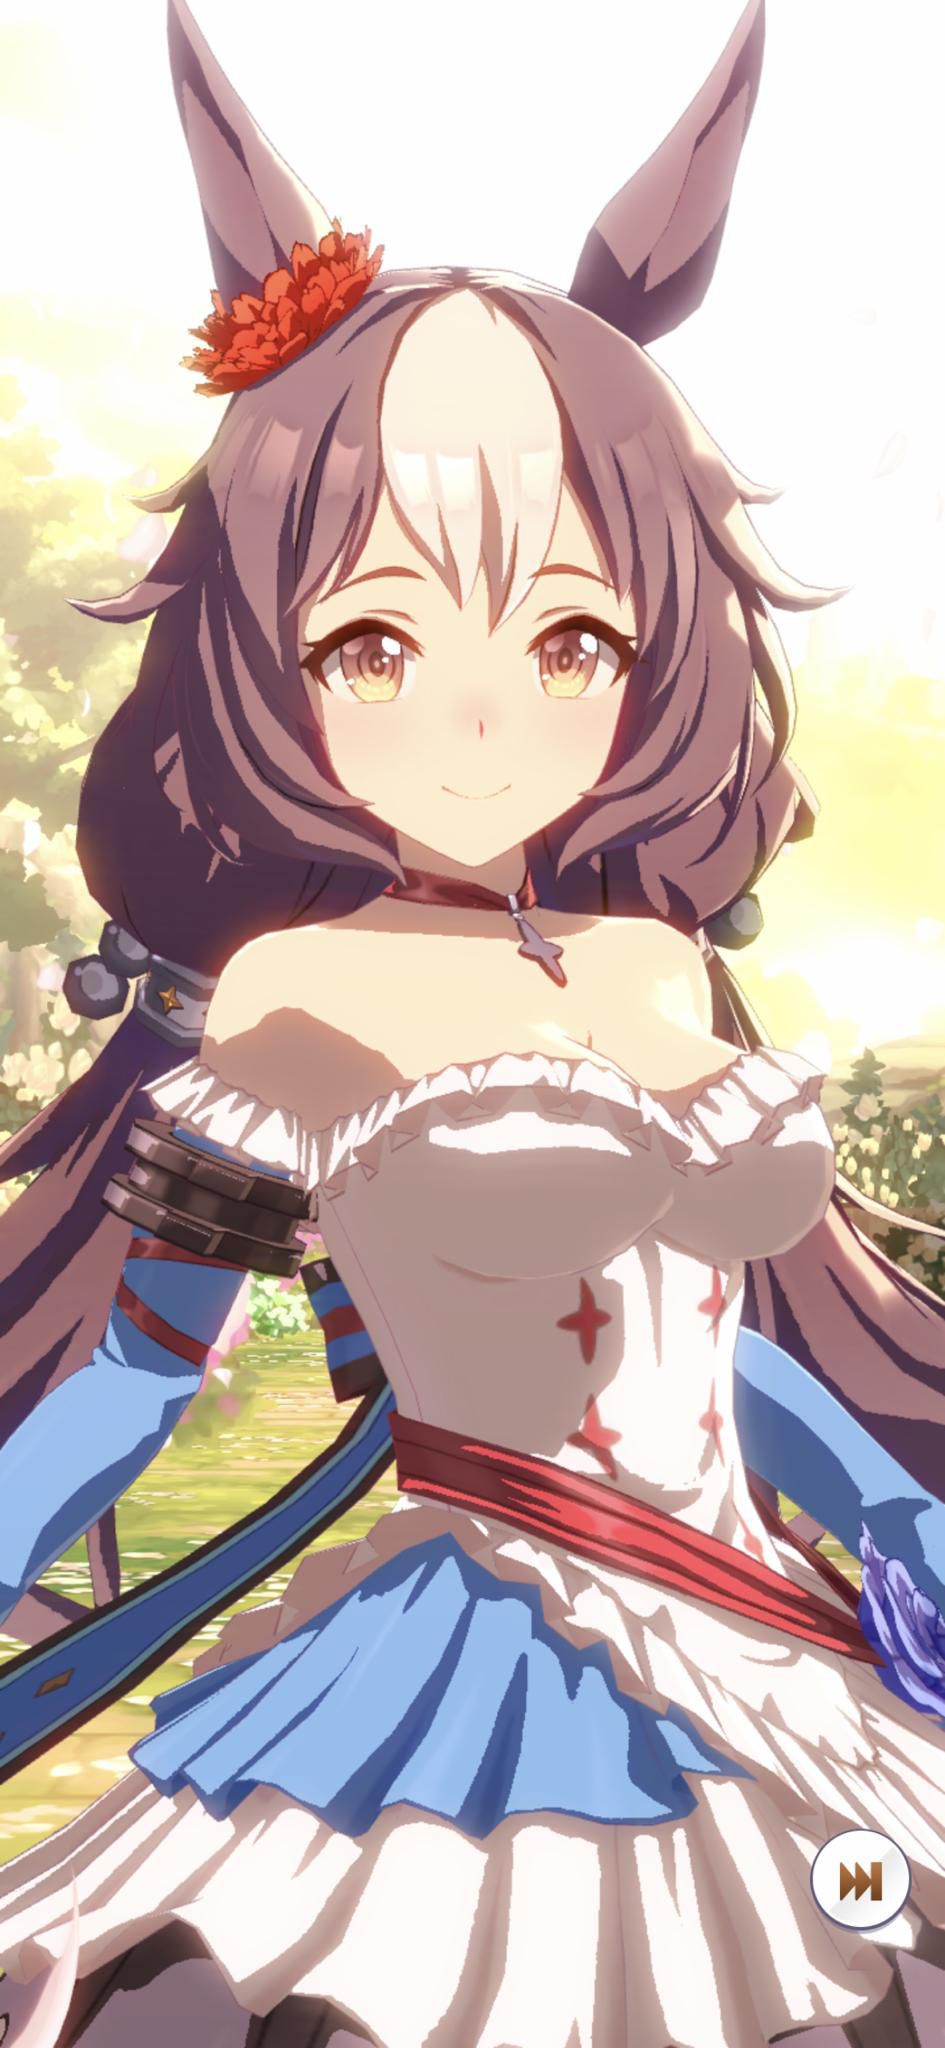 【Image】Uma Musume will implement a new character with the most erotic costume ever 3